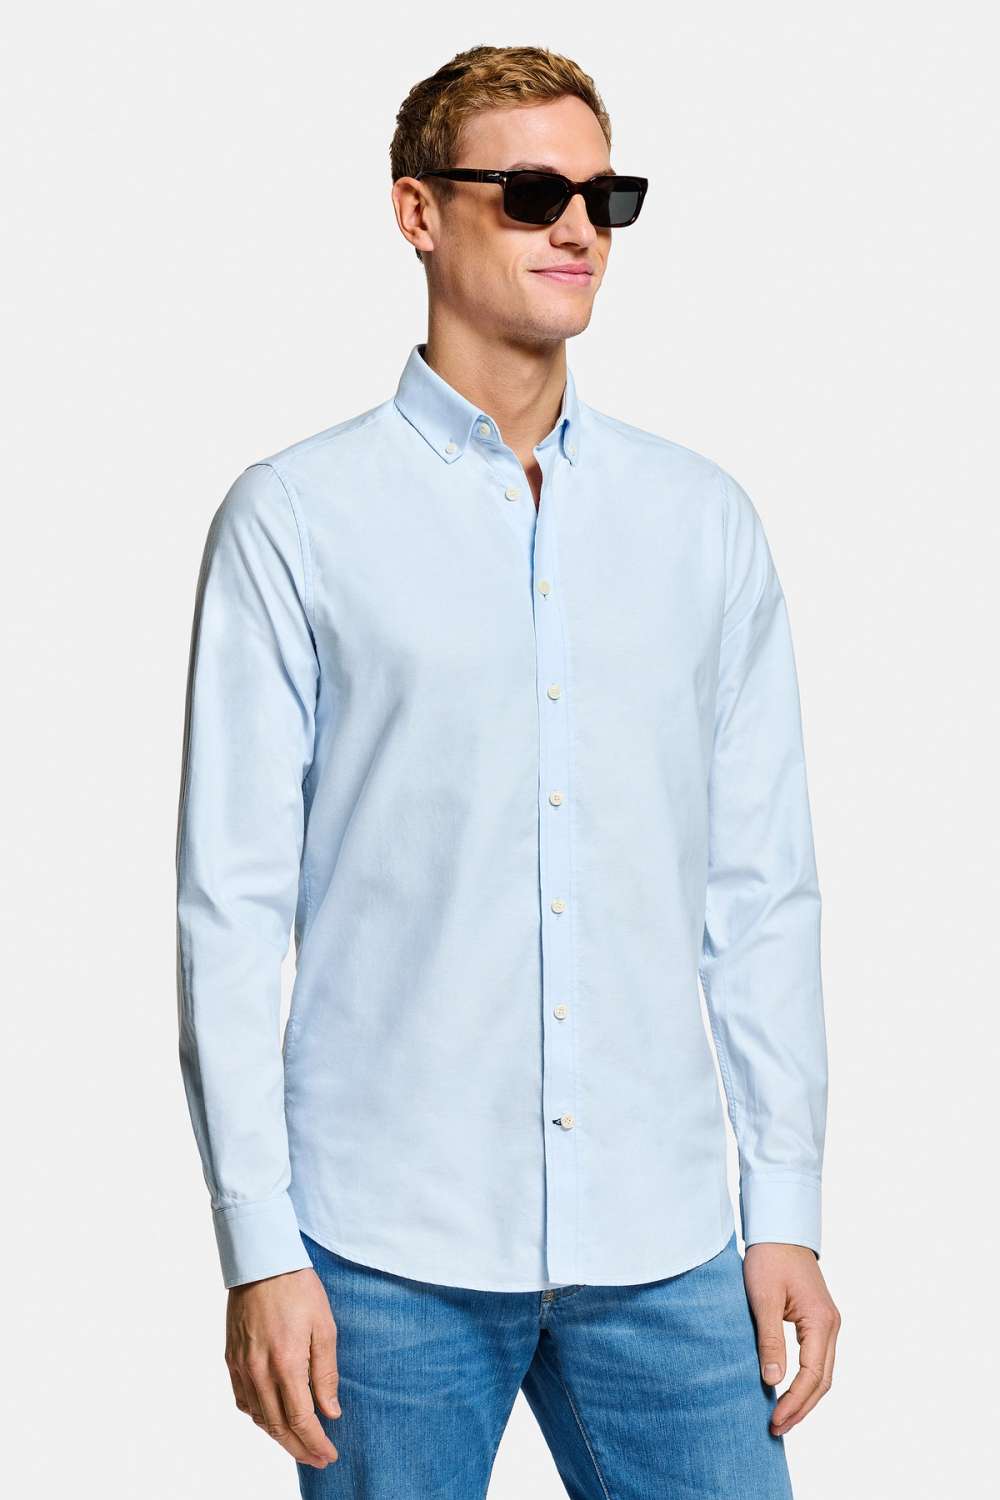 Avenues - The Oxford Shirt